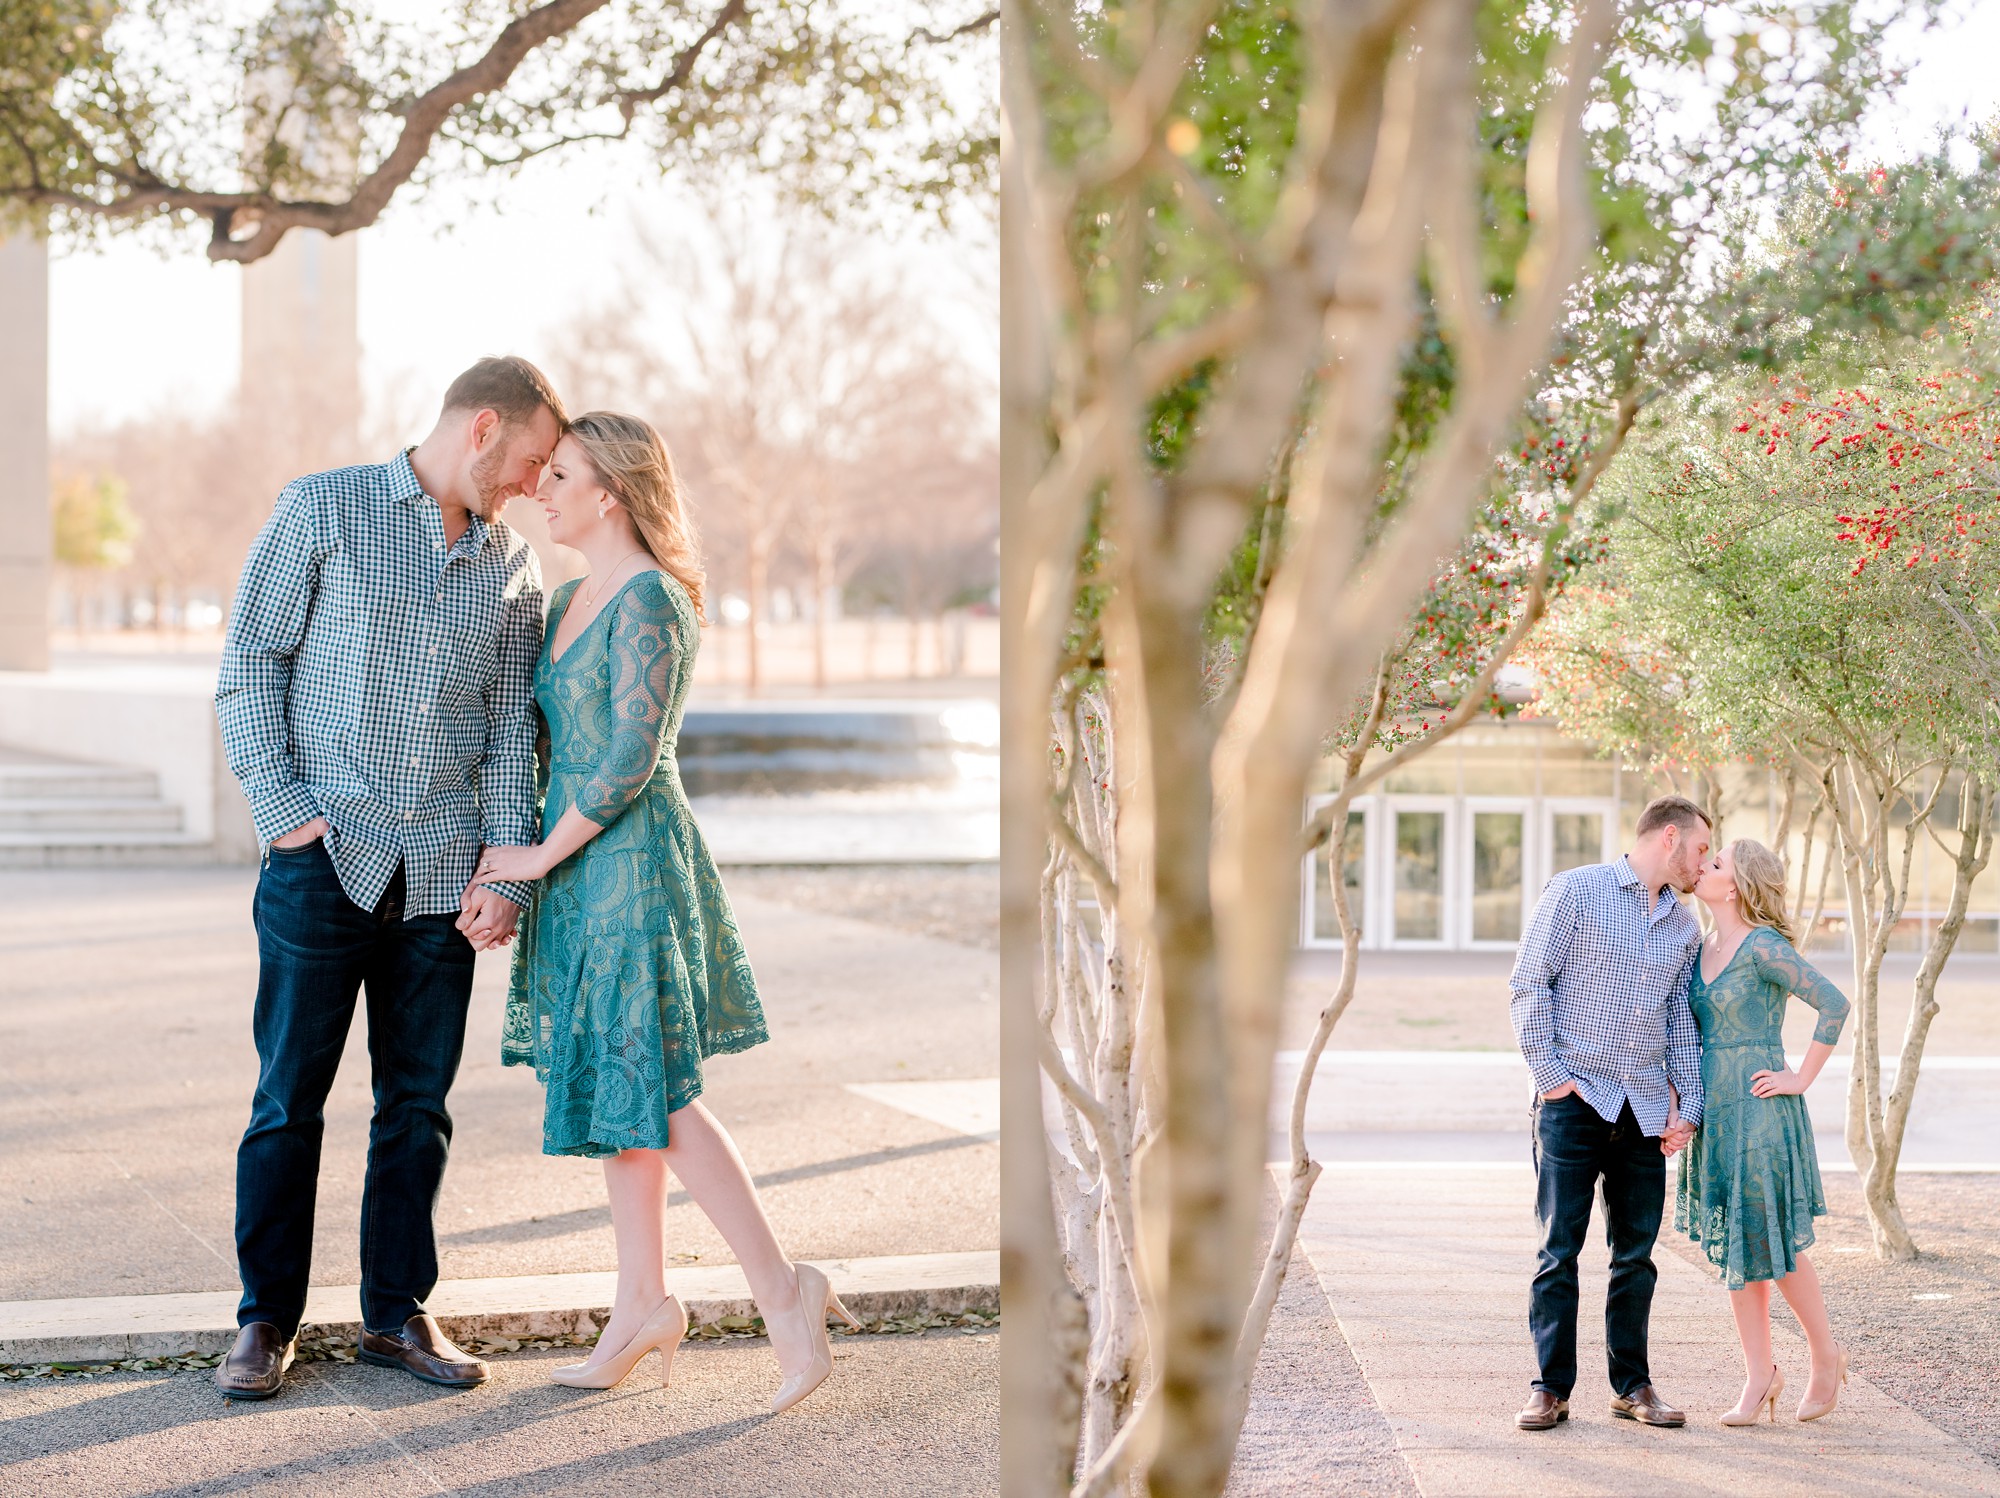 Kimbell Art Museum Engagement Photos in Fort Worth